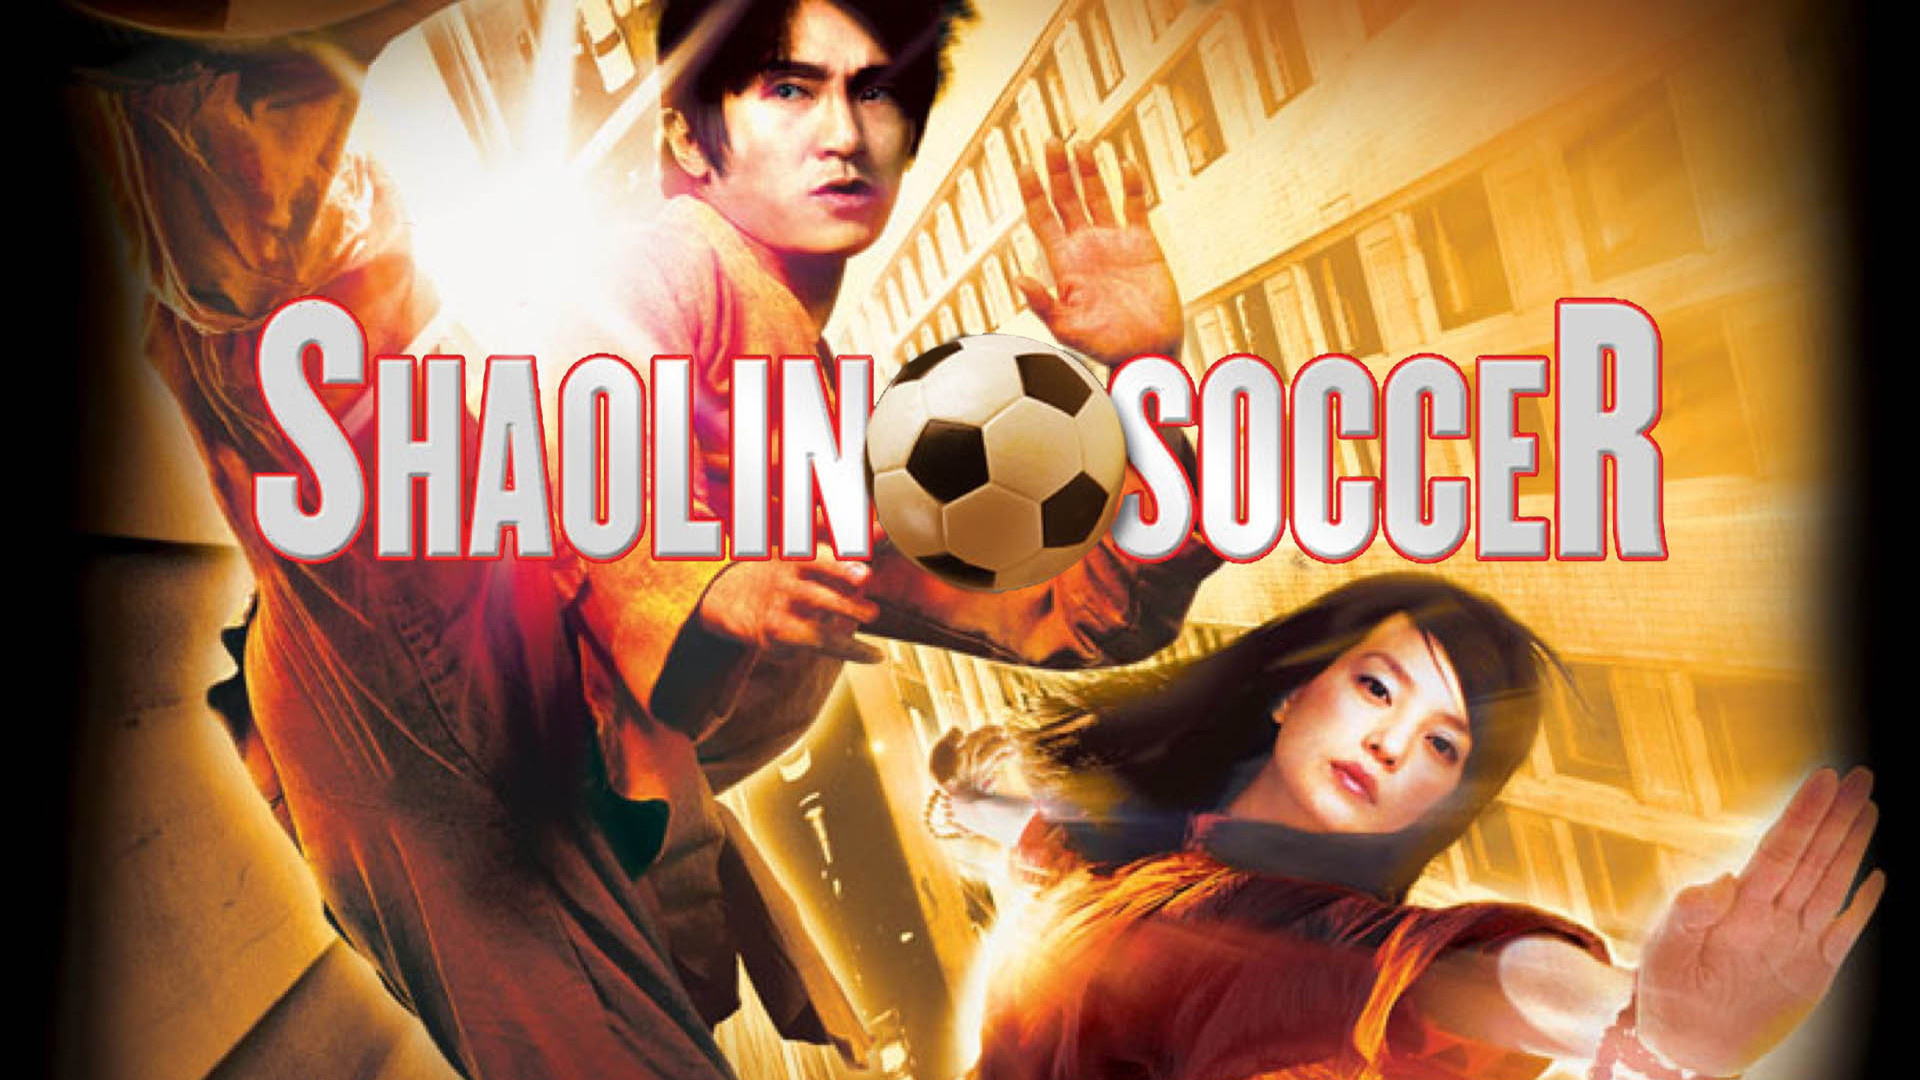 Shaolin Soccer: Sing, a skilled kung fu devotee whose amazing "leg of steel" catches the eye of a football coach. 1920x1080 Full HD Wallpaper.